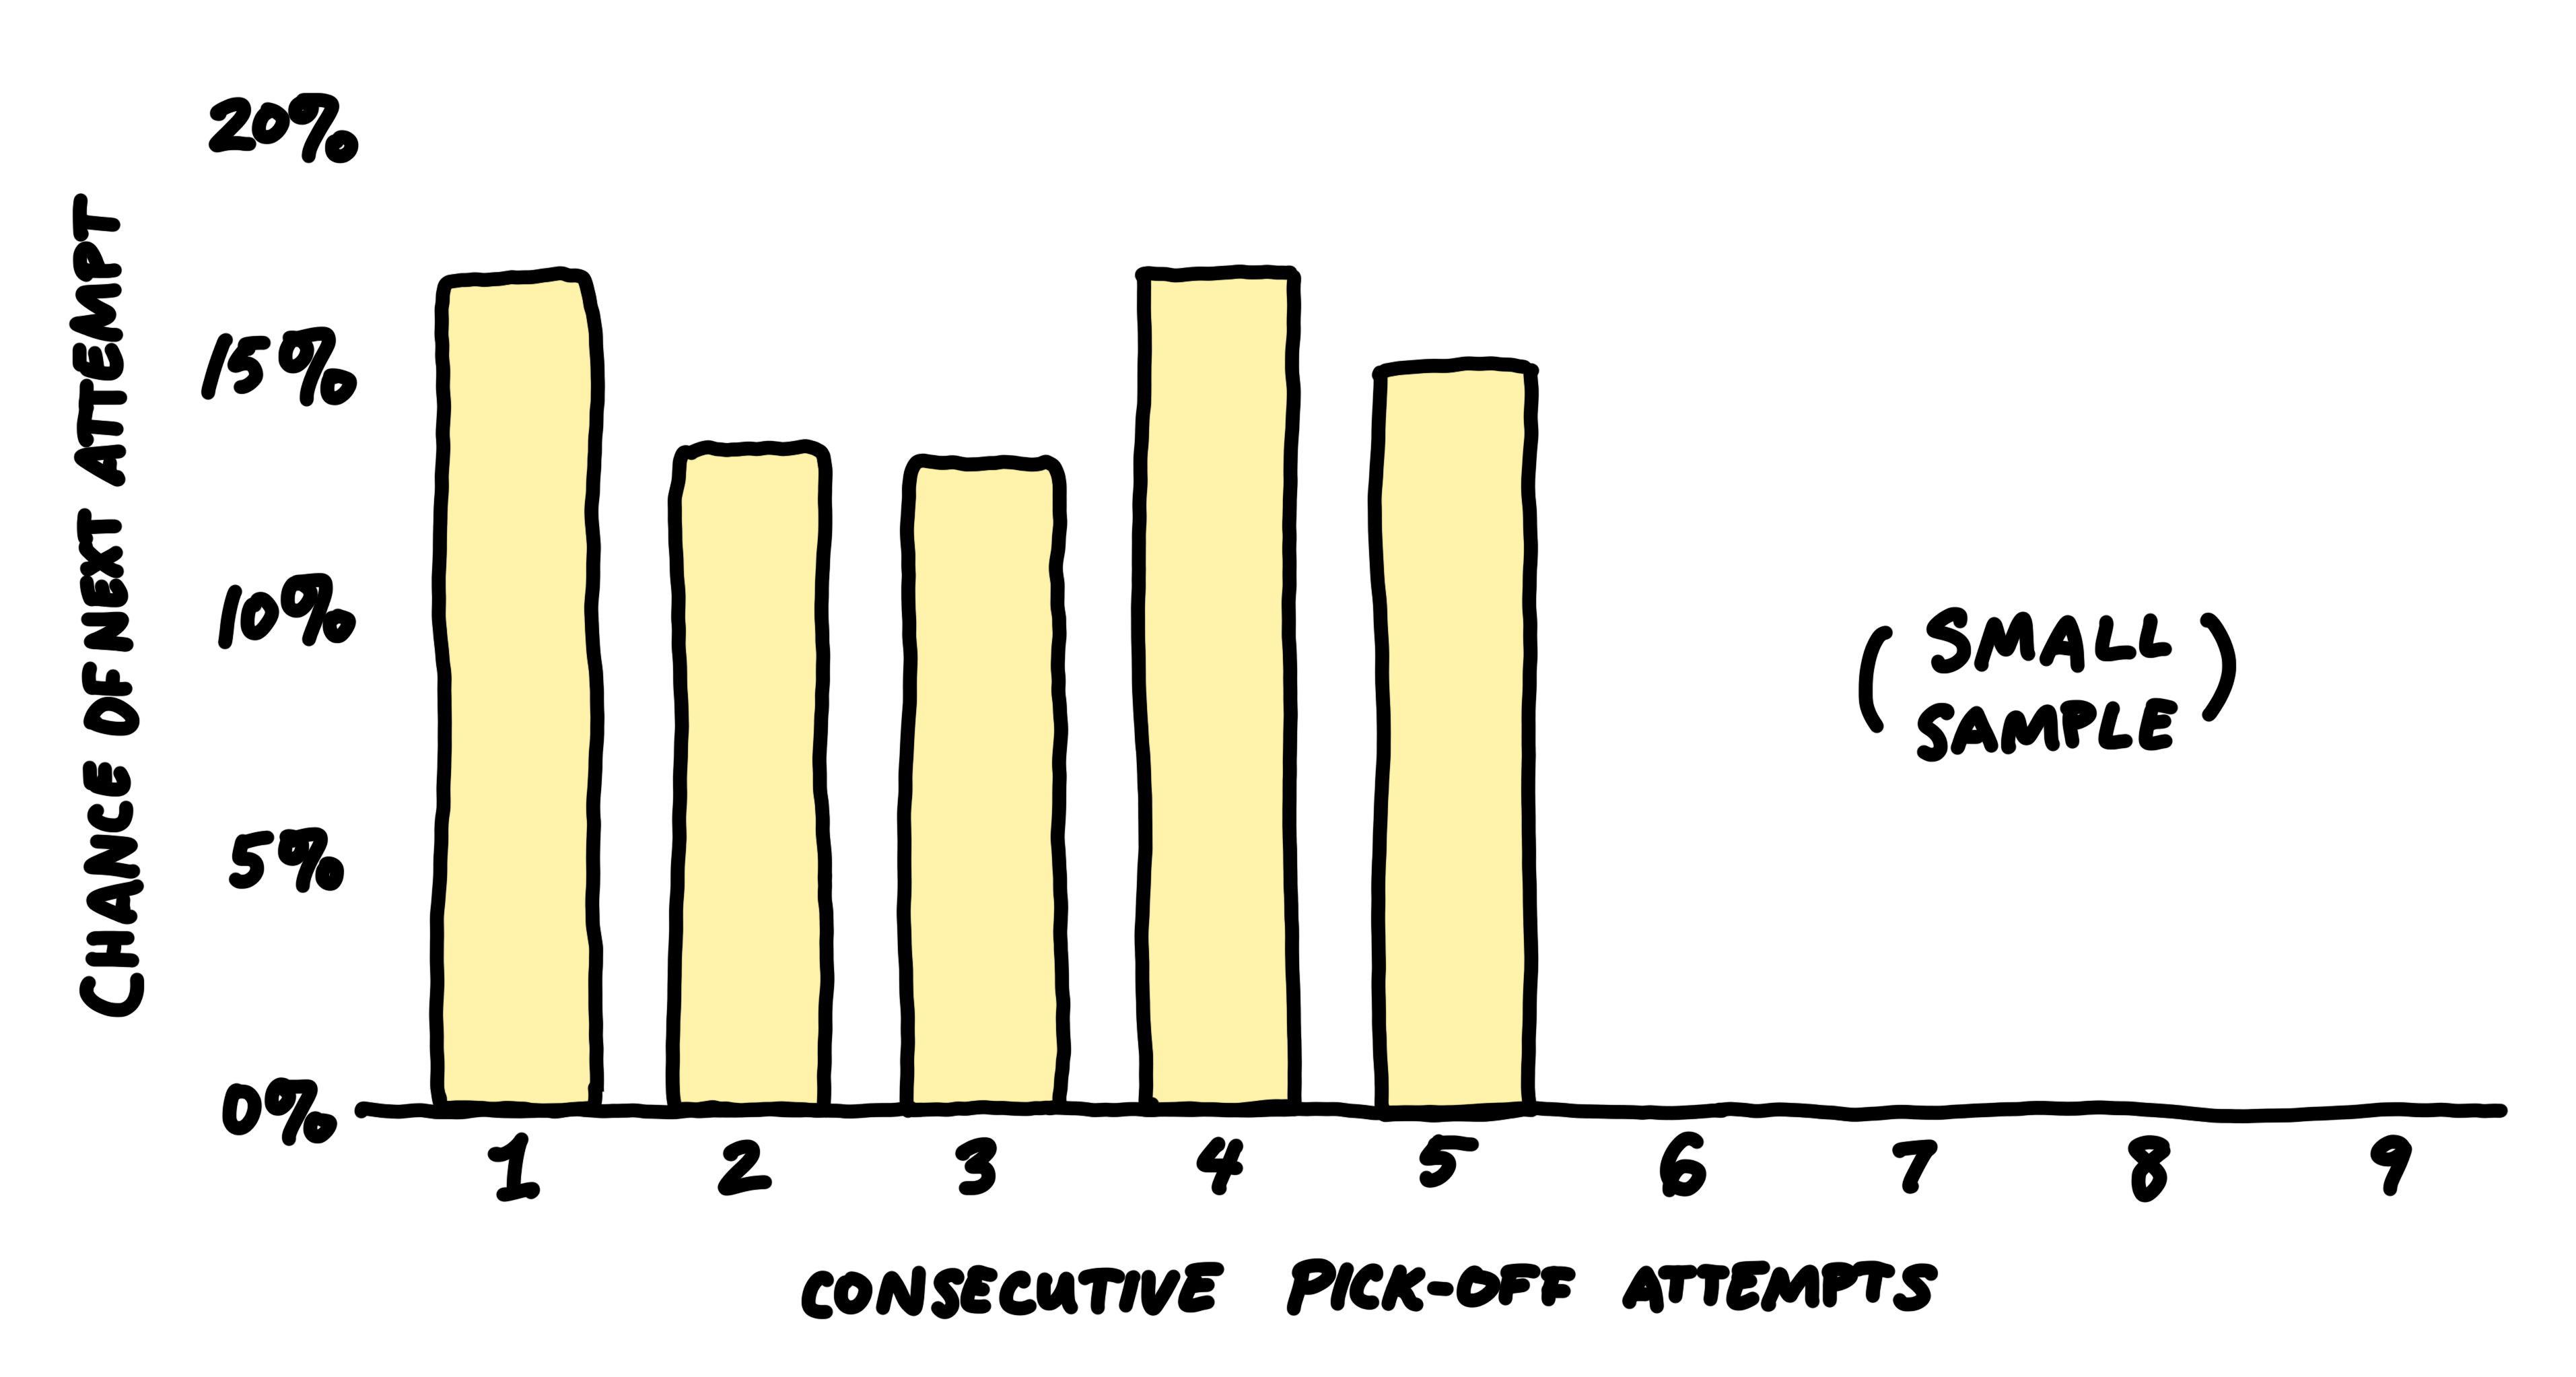 A bar chart showing the chance of a consecutive pick-off attempt as more are thrown